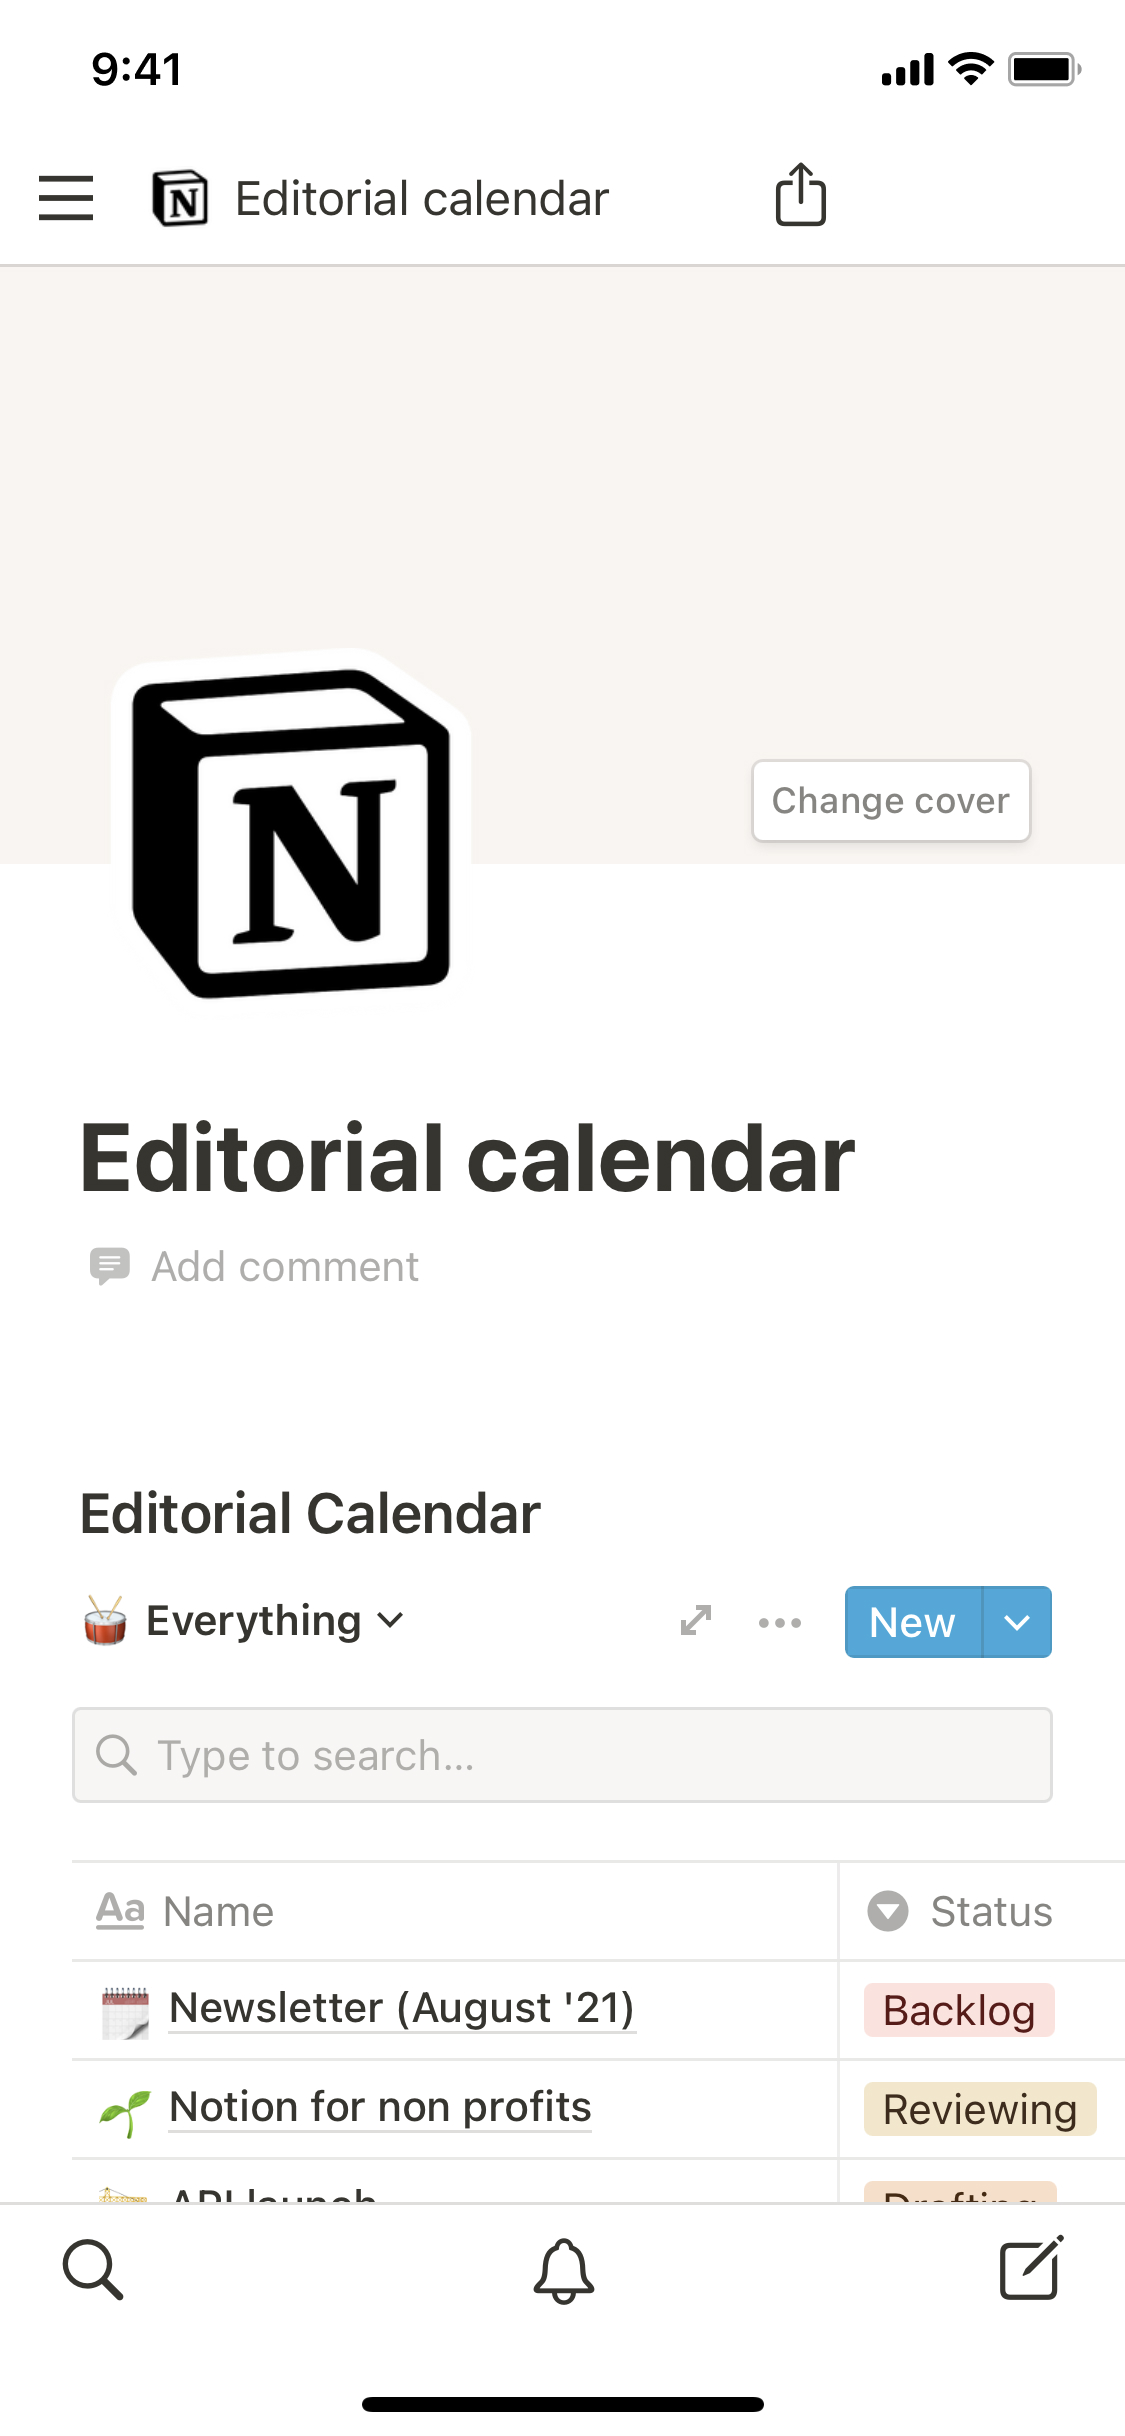 A screenshot of Notion's mobile app